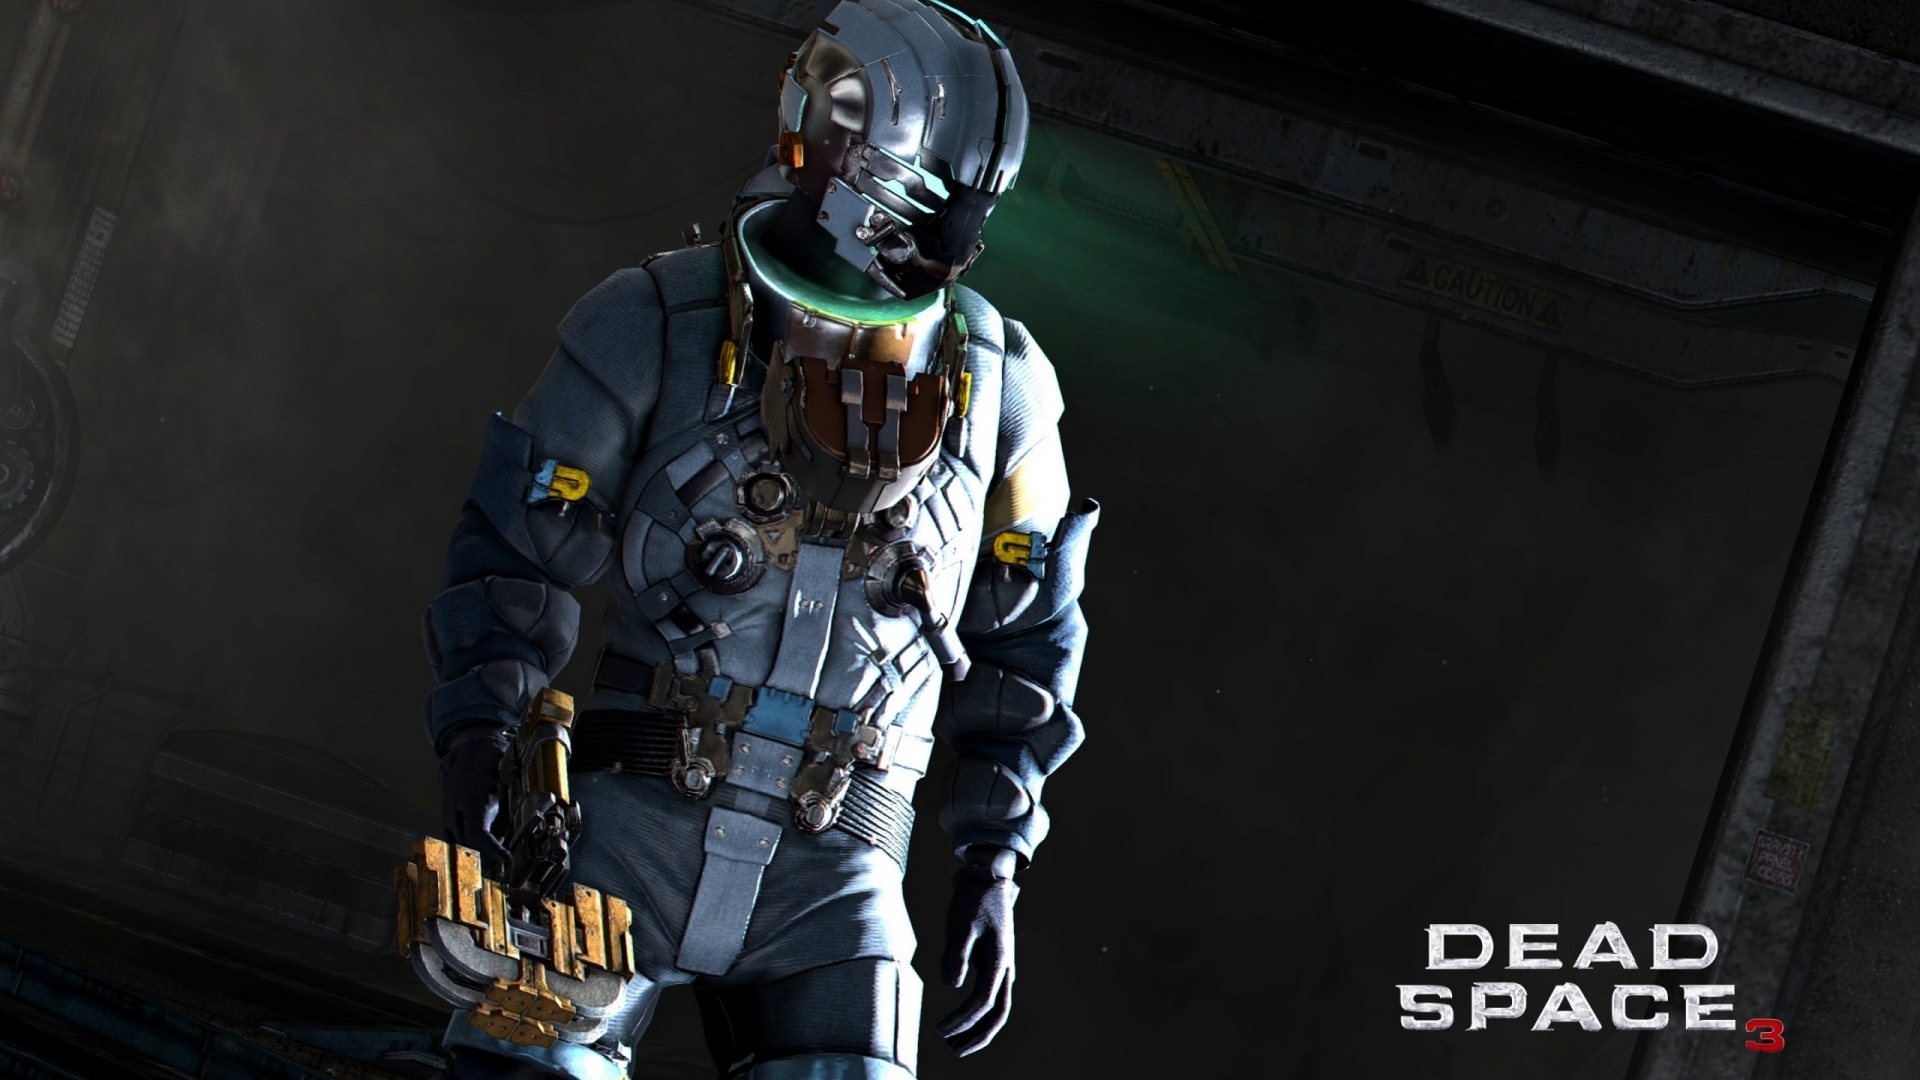 Dead Space 3 Costume for 1920 x 1080 HDTV 1080p resolution